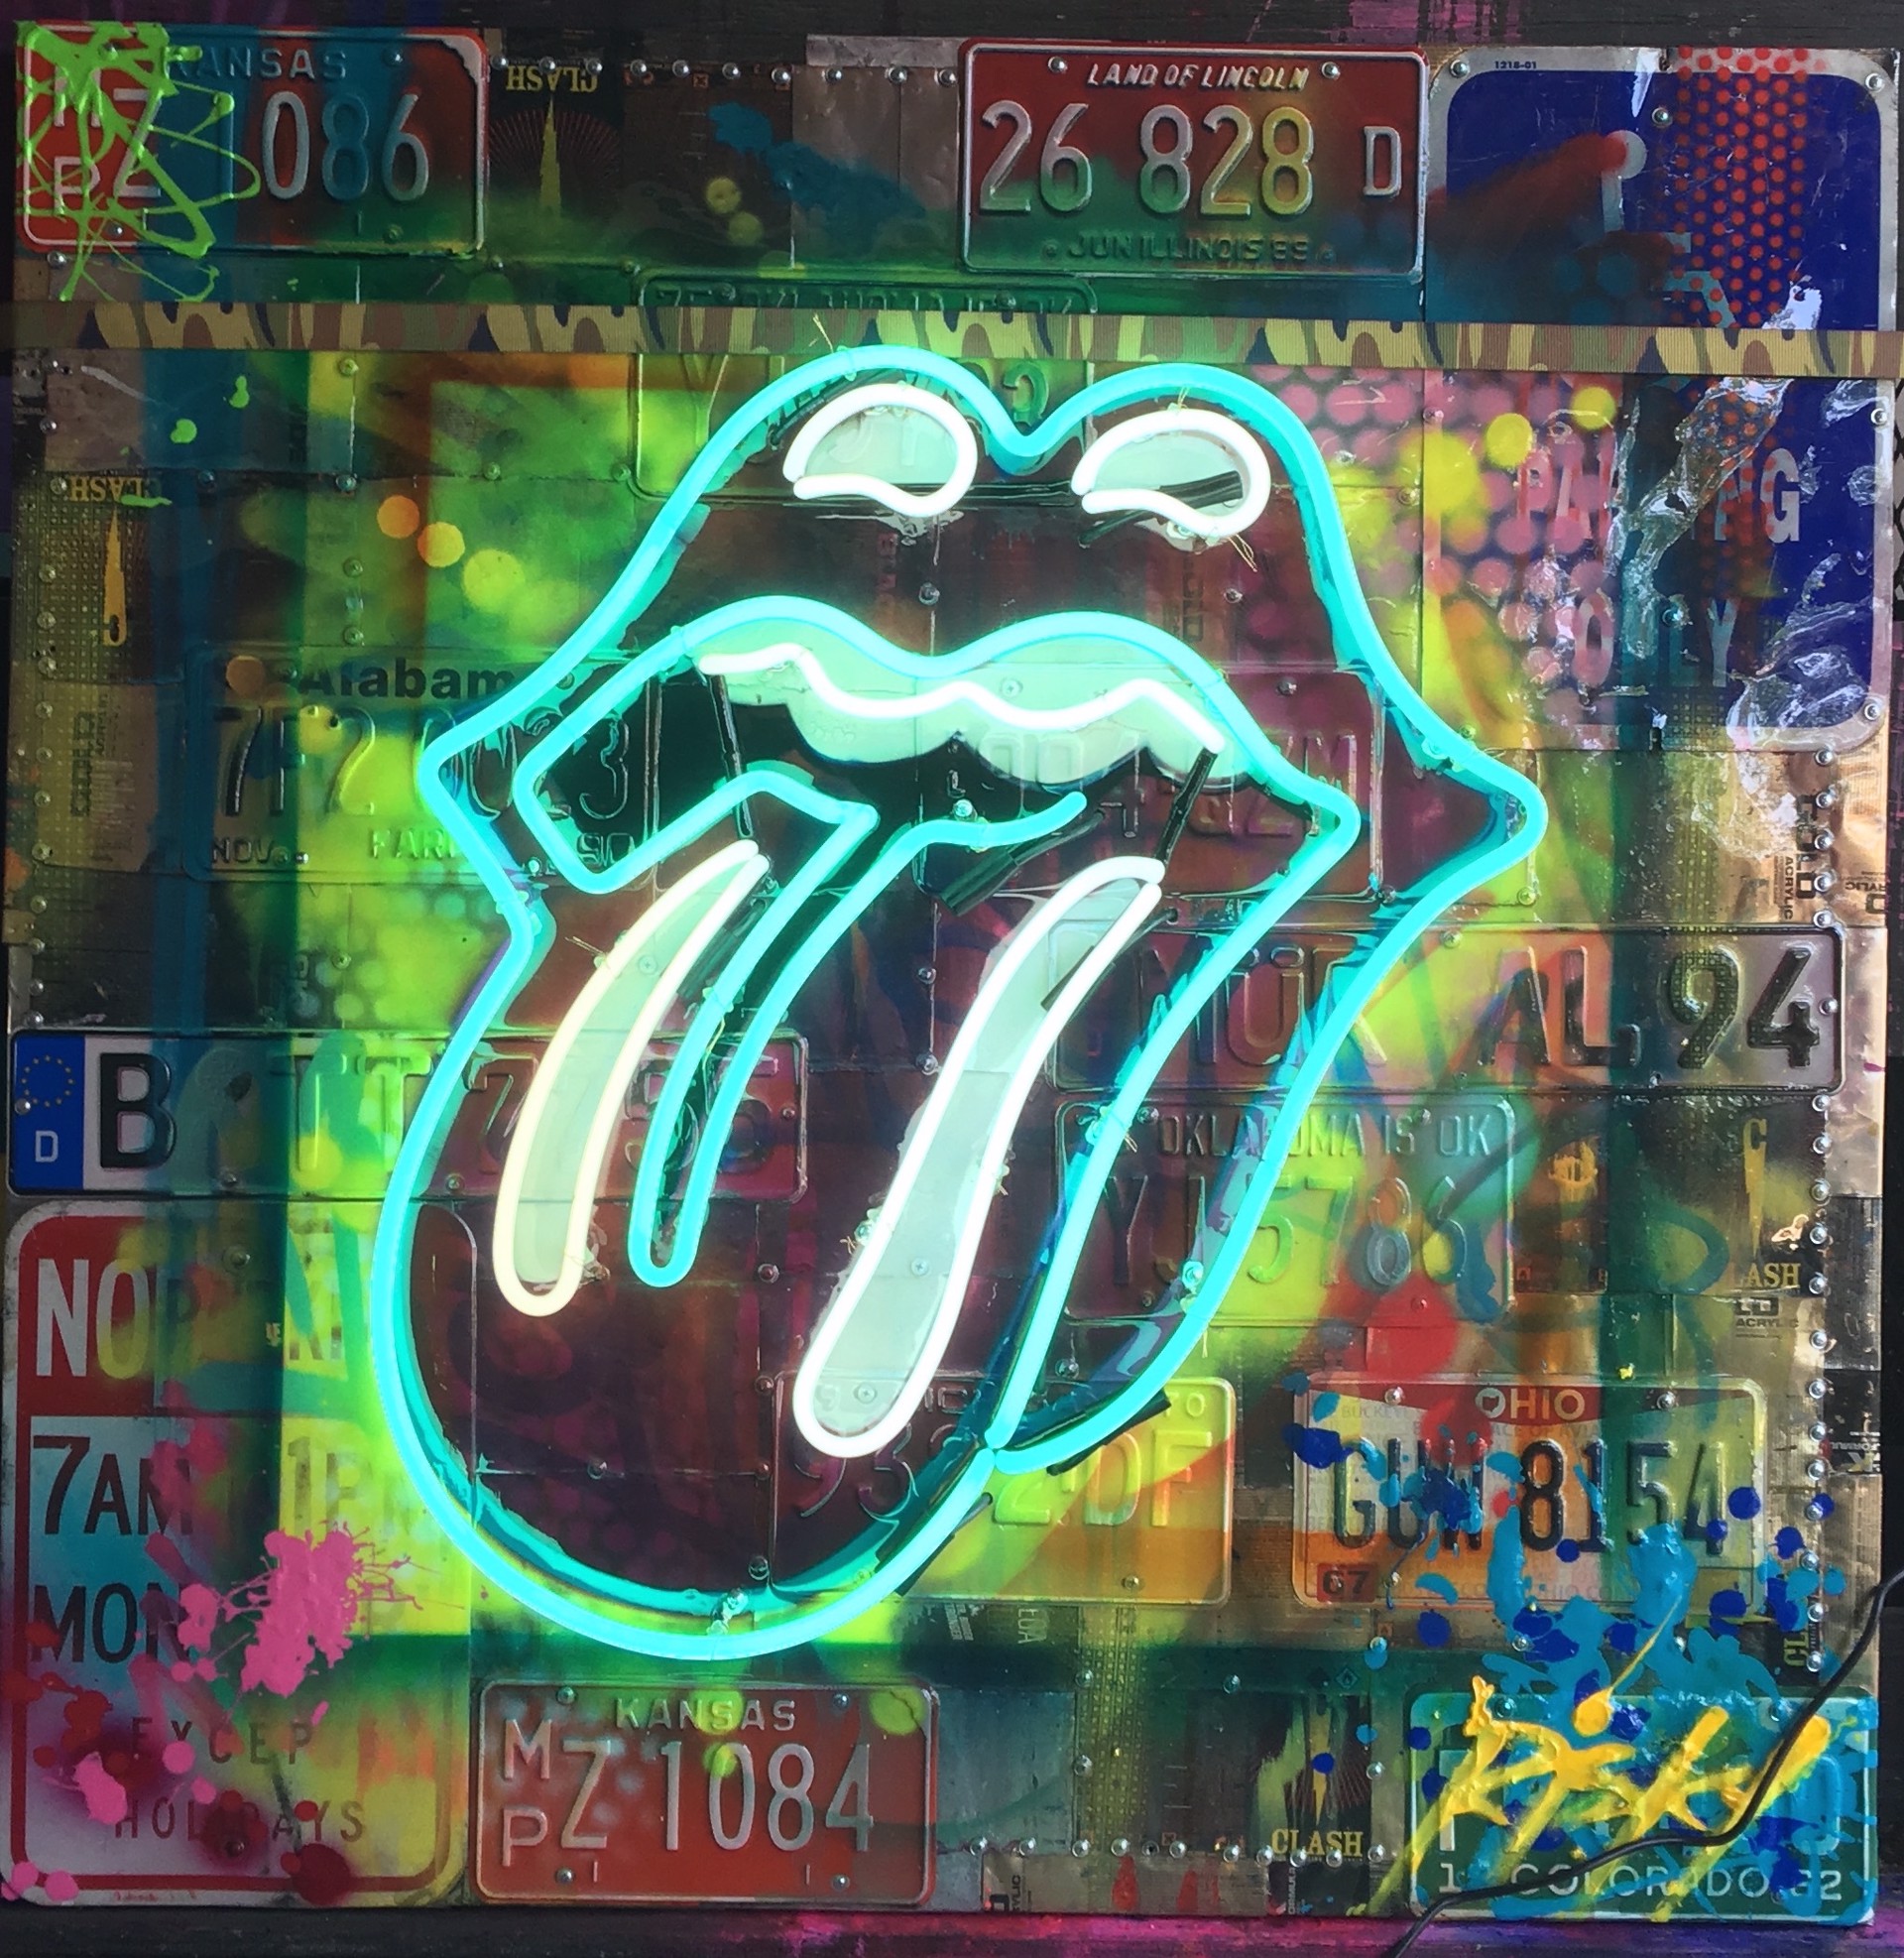 Rolling Stones (Turquoise) by Risk